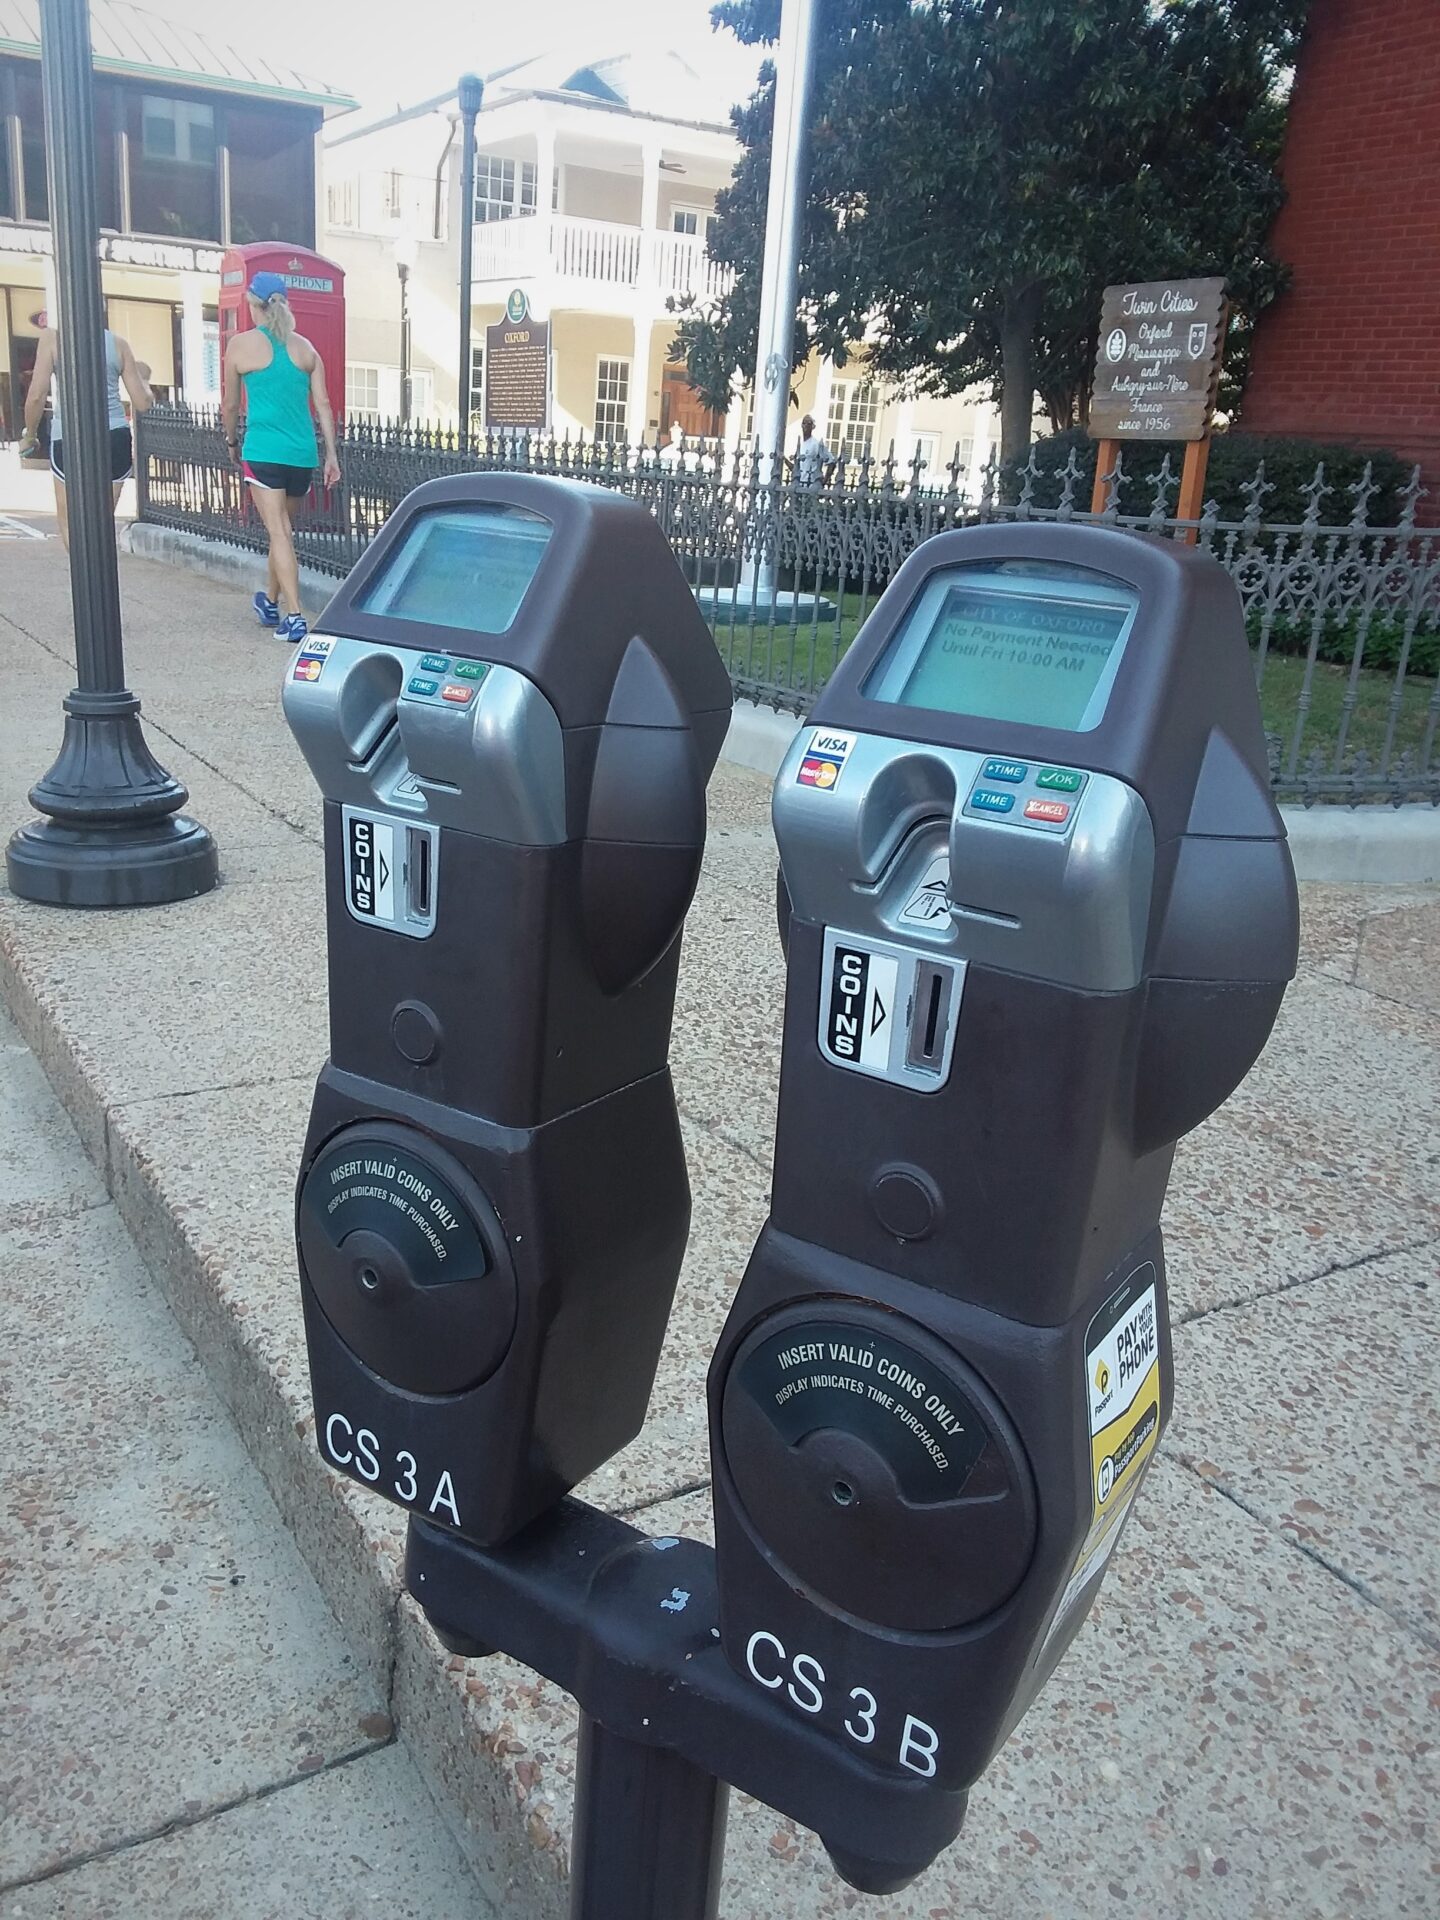 Parking Meters on Oxford Square Will be Turned on June 1